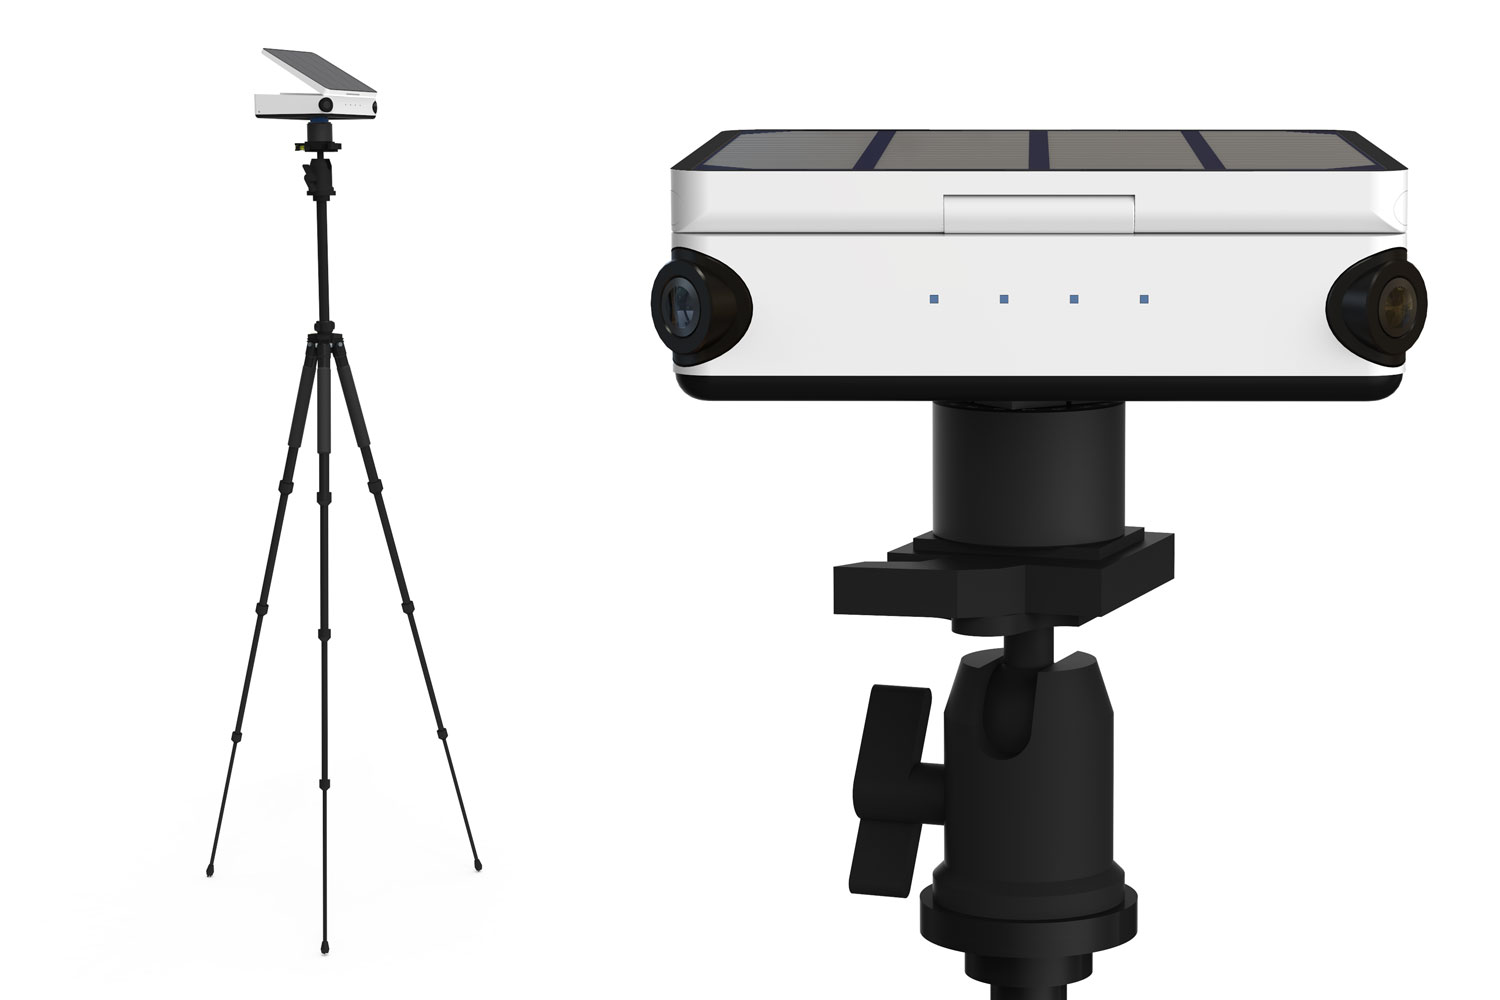 enlaps worlds first unlimited time lapse photography solution timelaps camera kickstarter 7